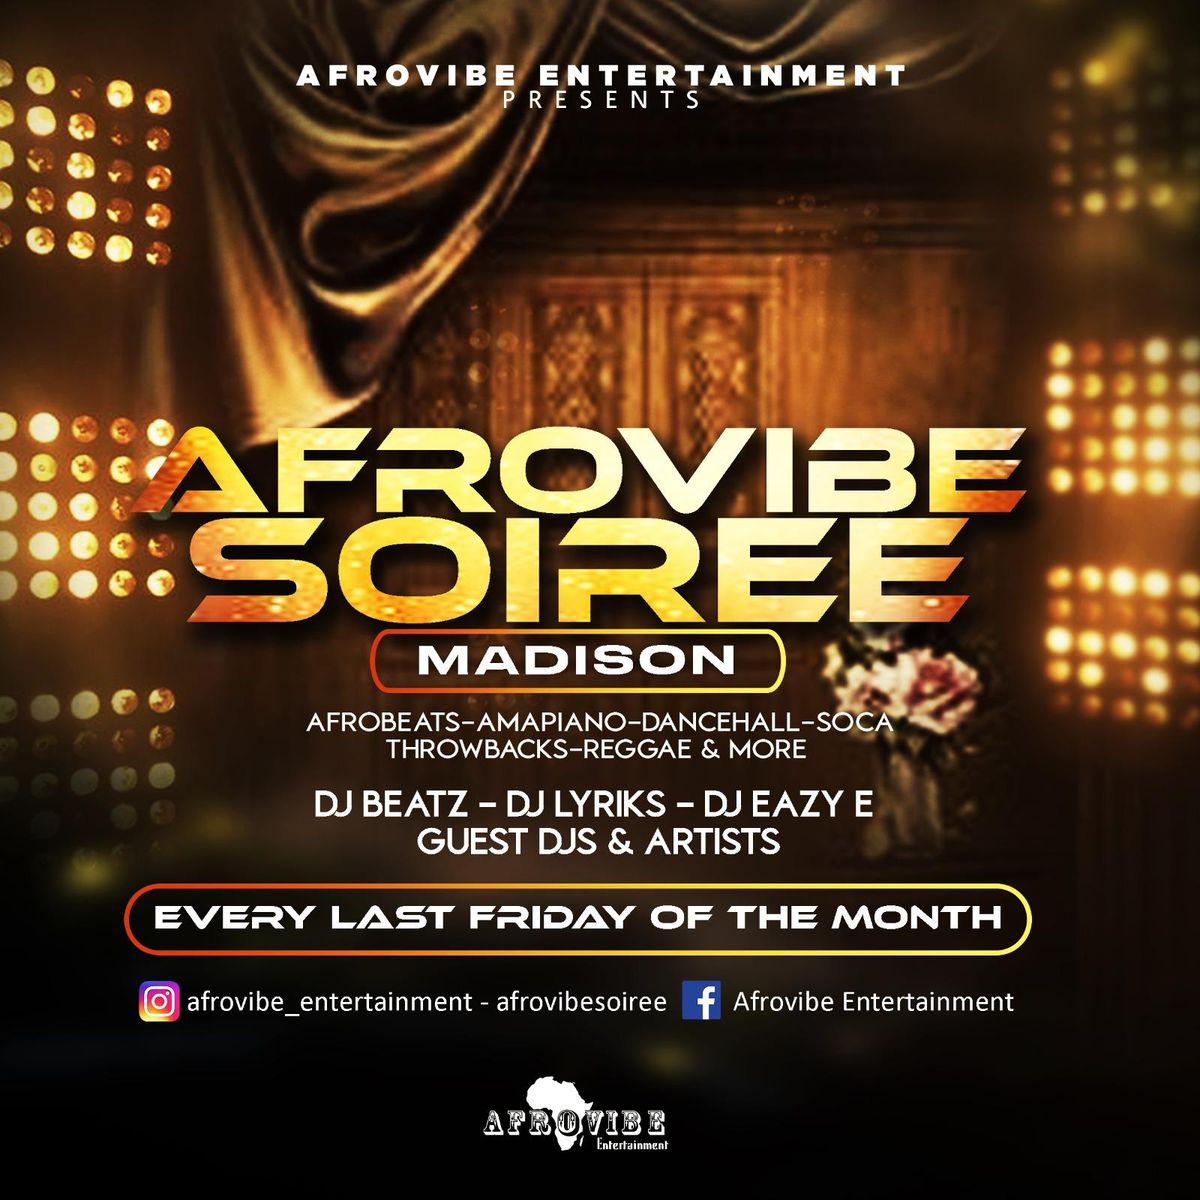 AfroVibe Soiree | Friday Night DJ Dance Party | $15 (Limited Early Bird) | $20